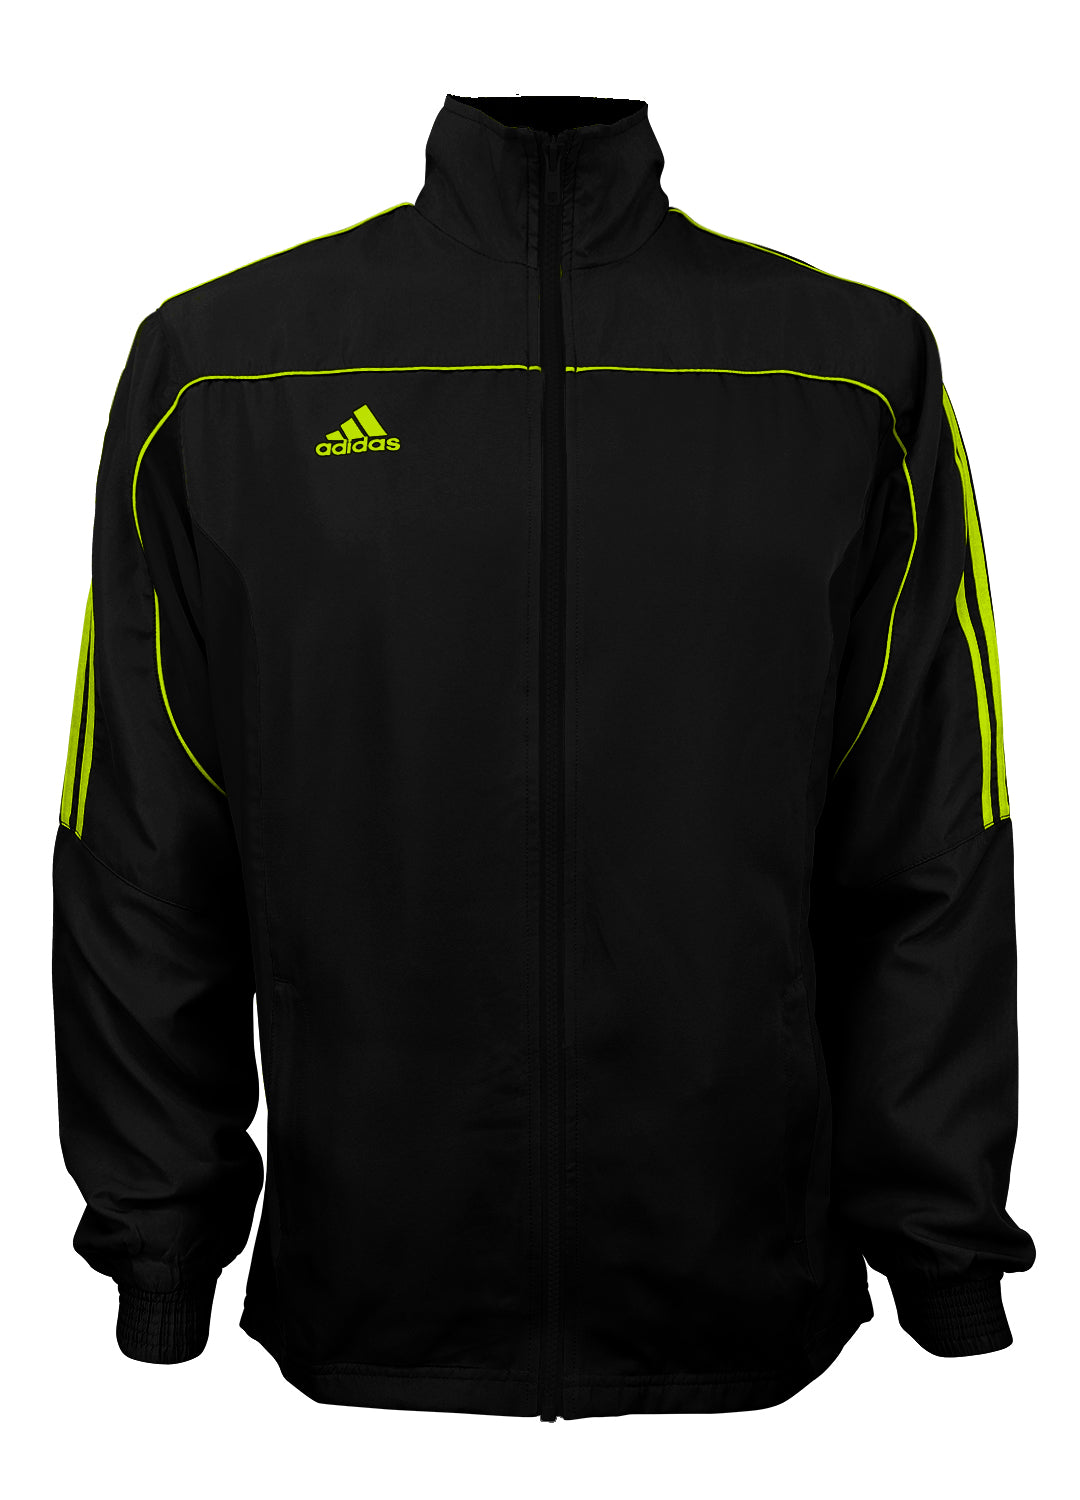 adidas Black with Neon Green Stripes Windbreaker Style Team Jacket Front View